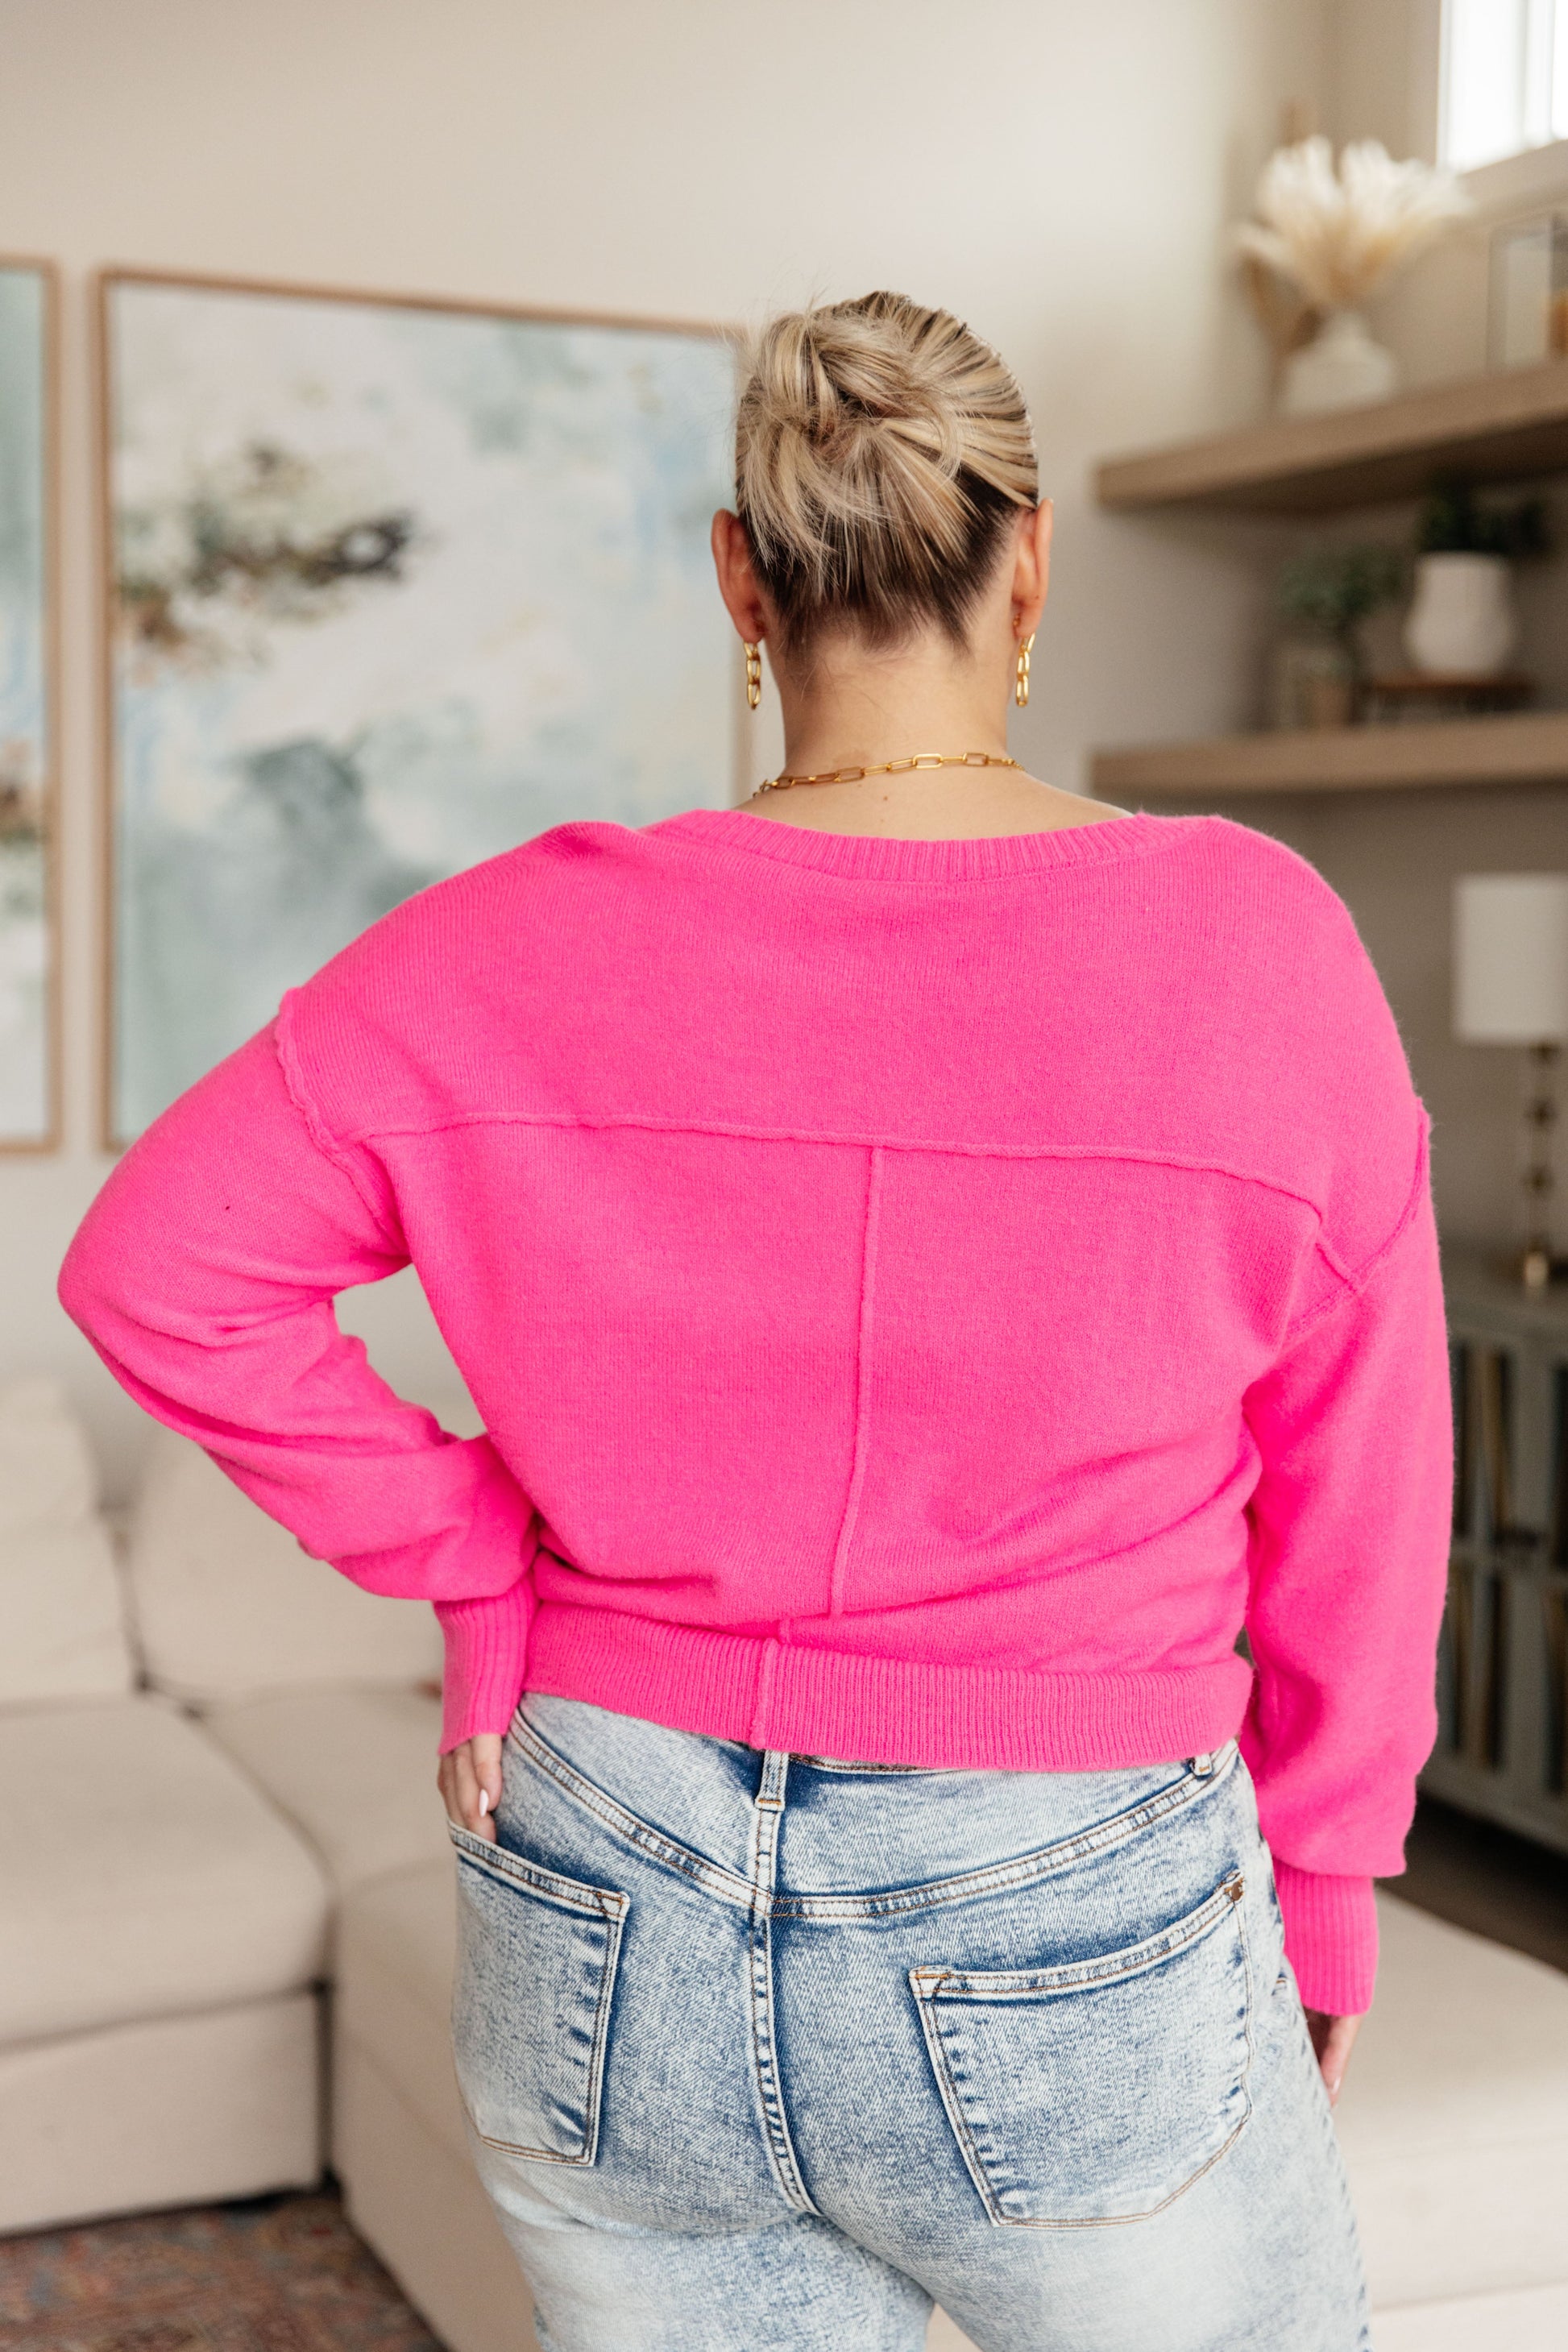 Back to Life V-Neck Sweater in Pink - Dixie Hike & Style